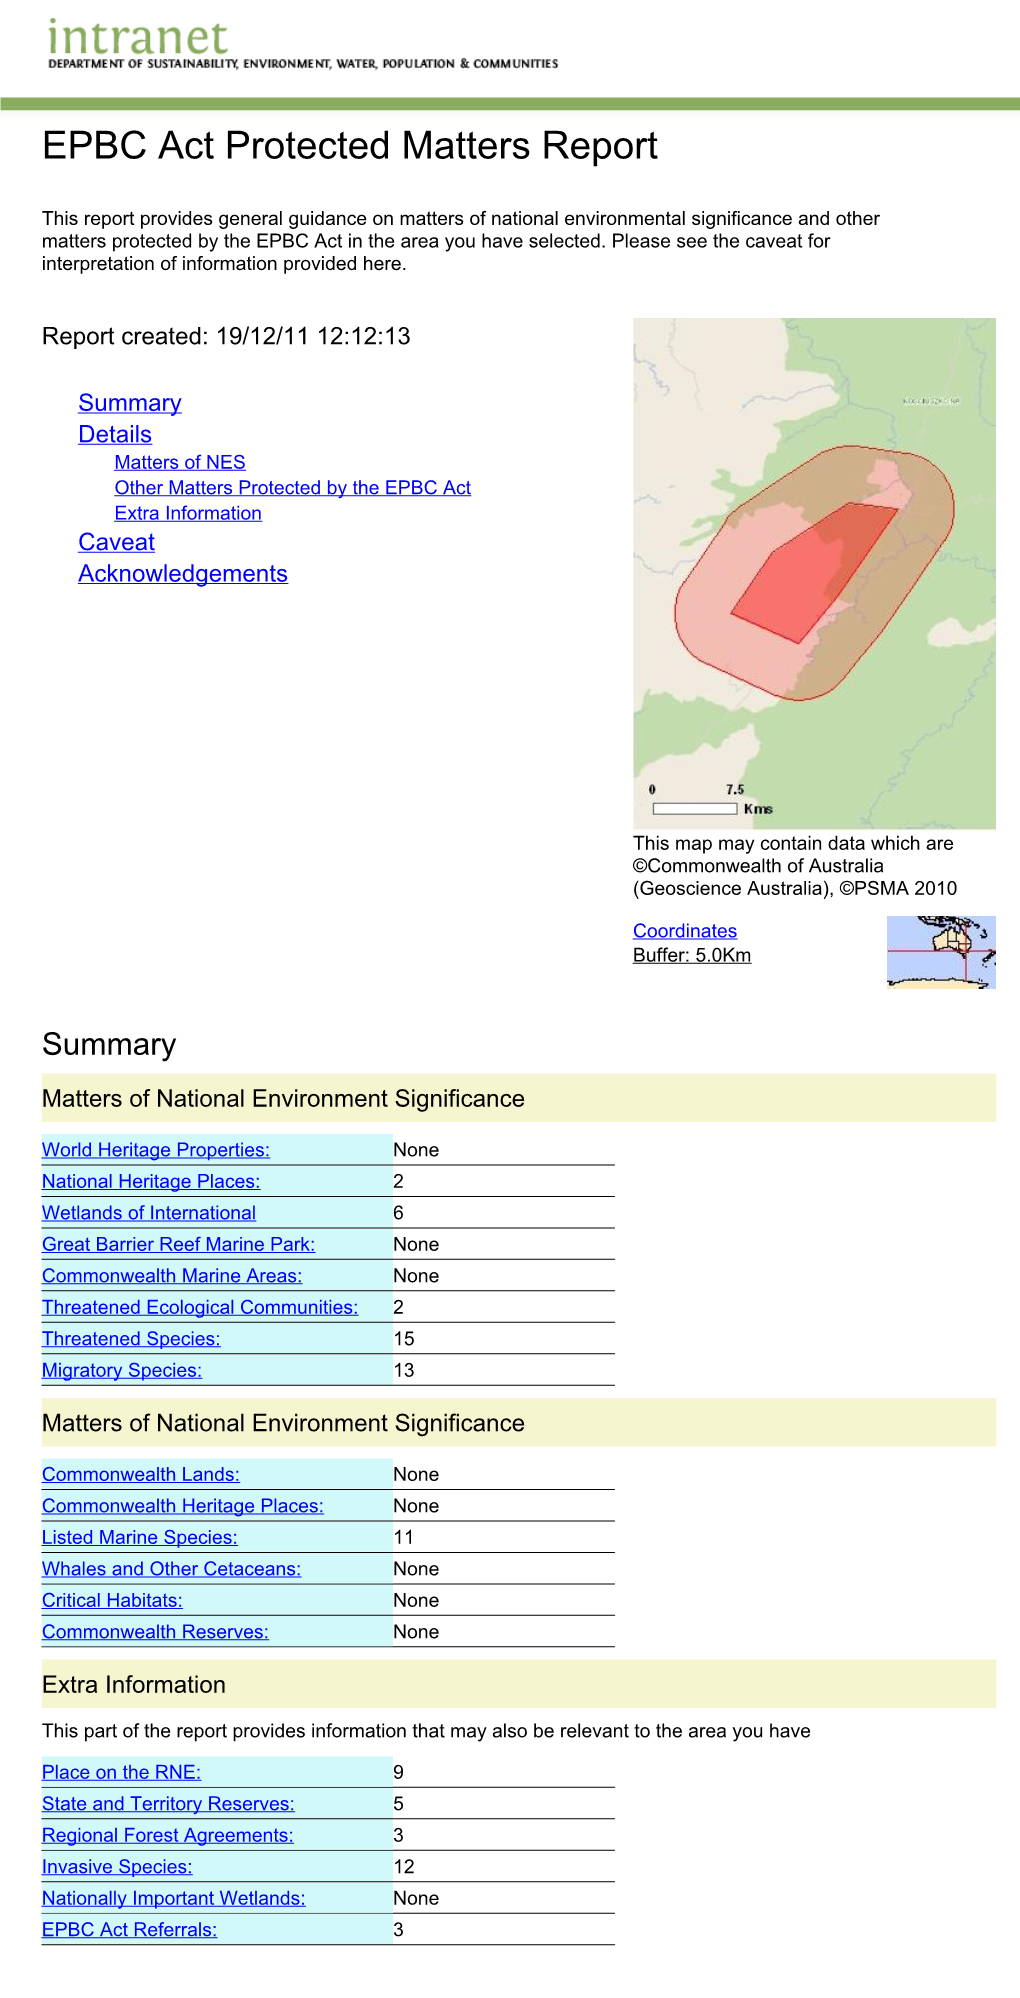 EPBC Act Protected Matters Report Site C4 (